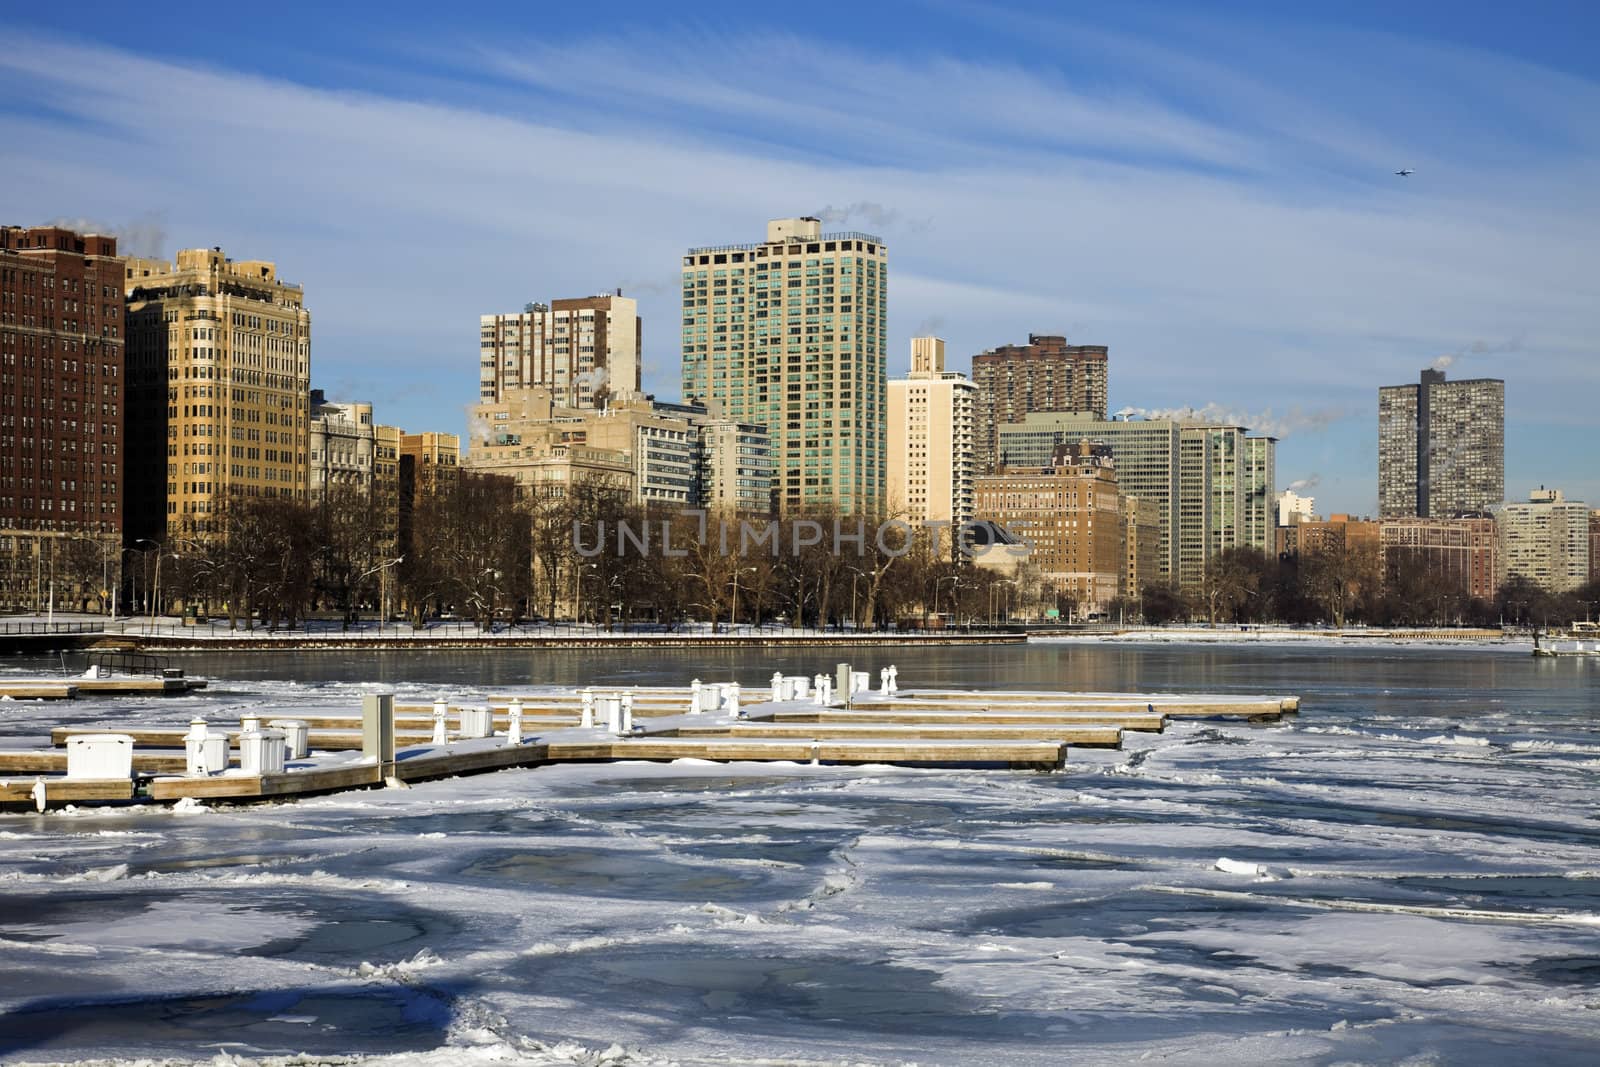 Iced marina in Chicago by benkrut